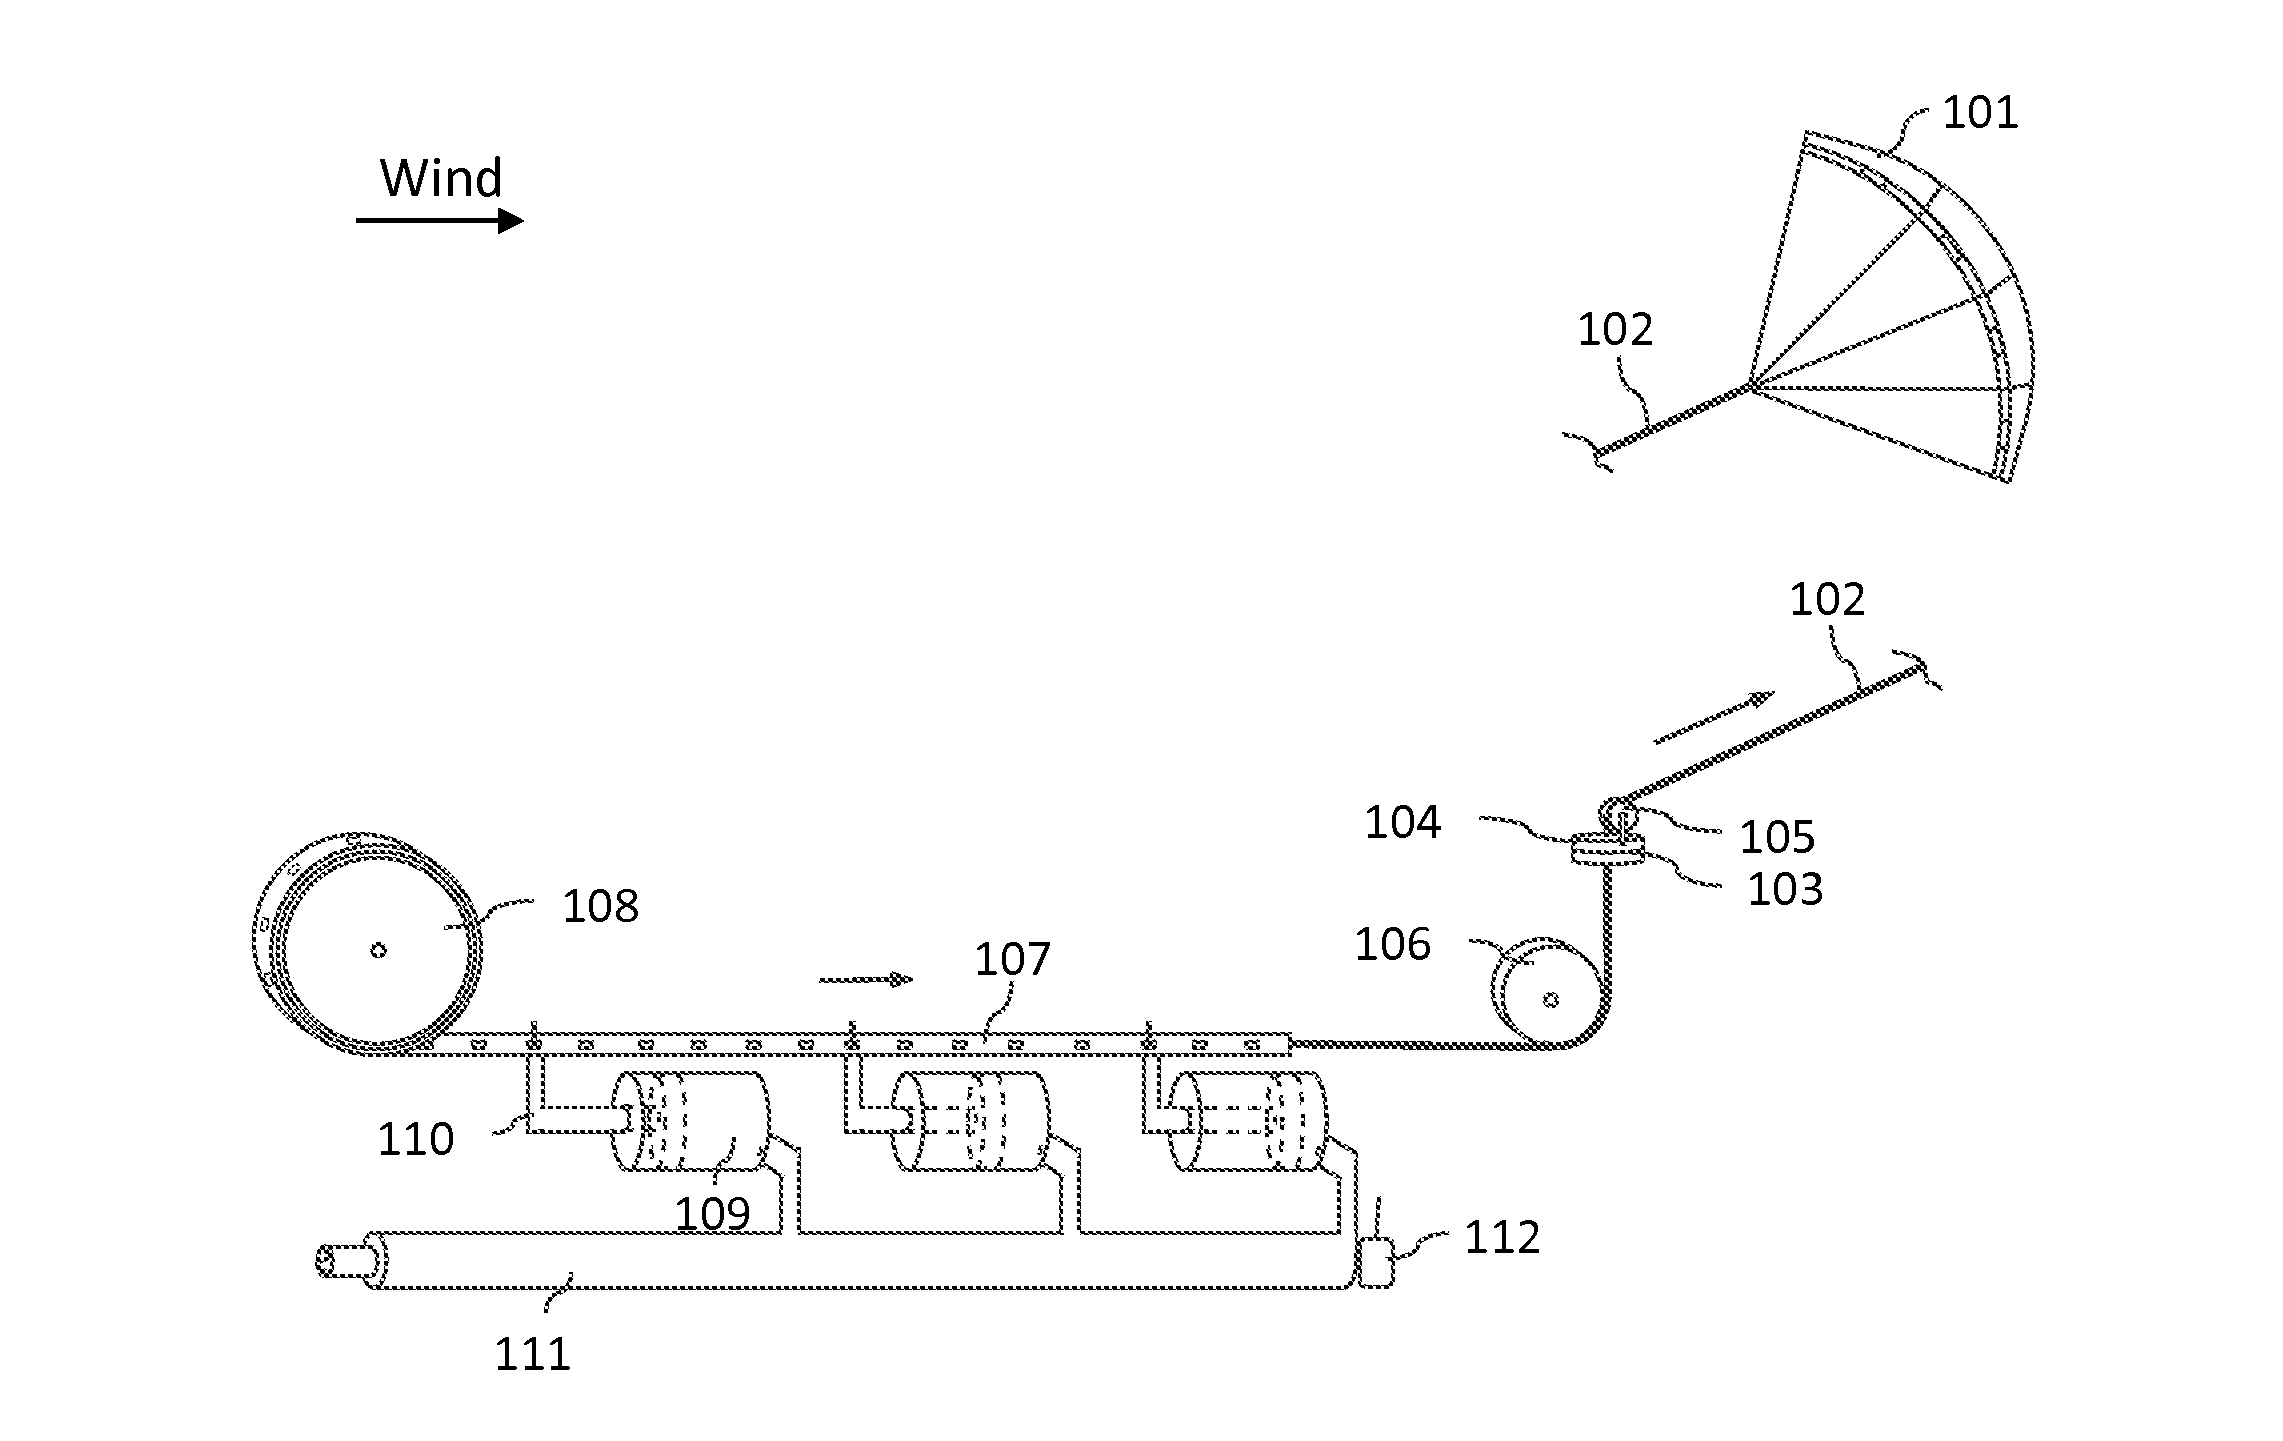 Airborne wind energy system for electricity generation, energy storage, and other uses